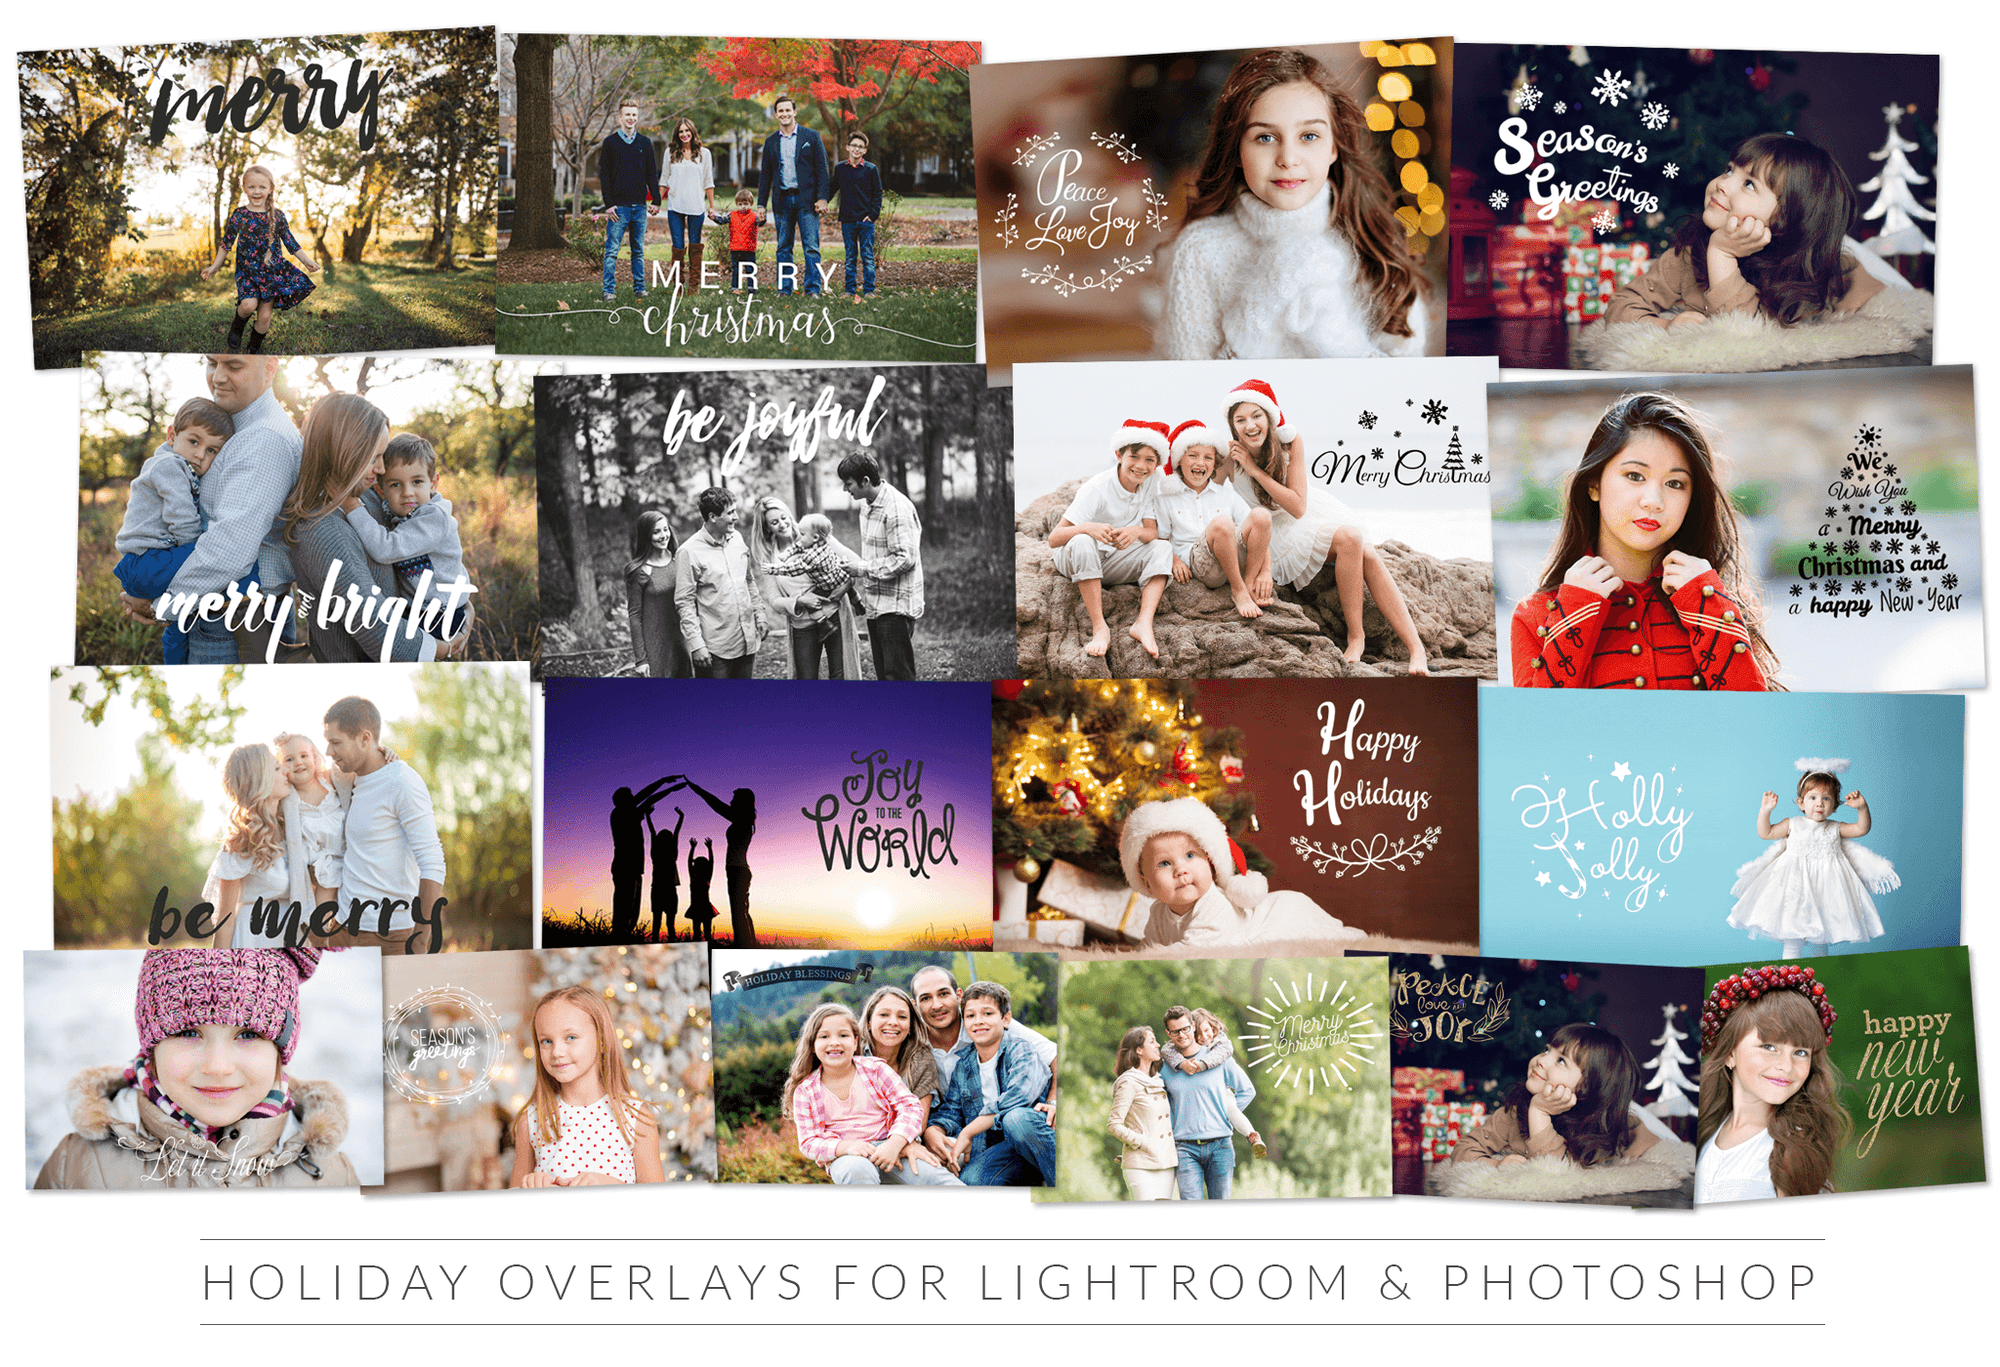 22 Holiday Overlays for Lightroom & Photoshop